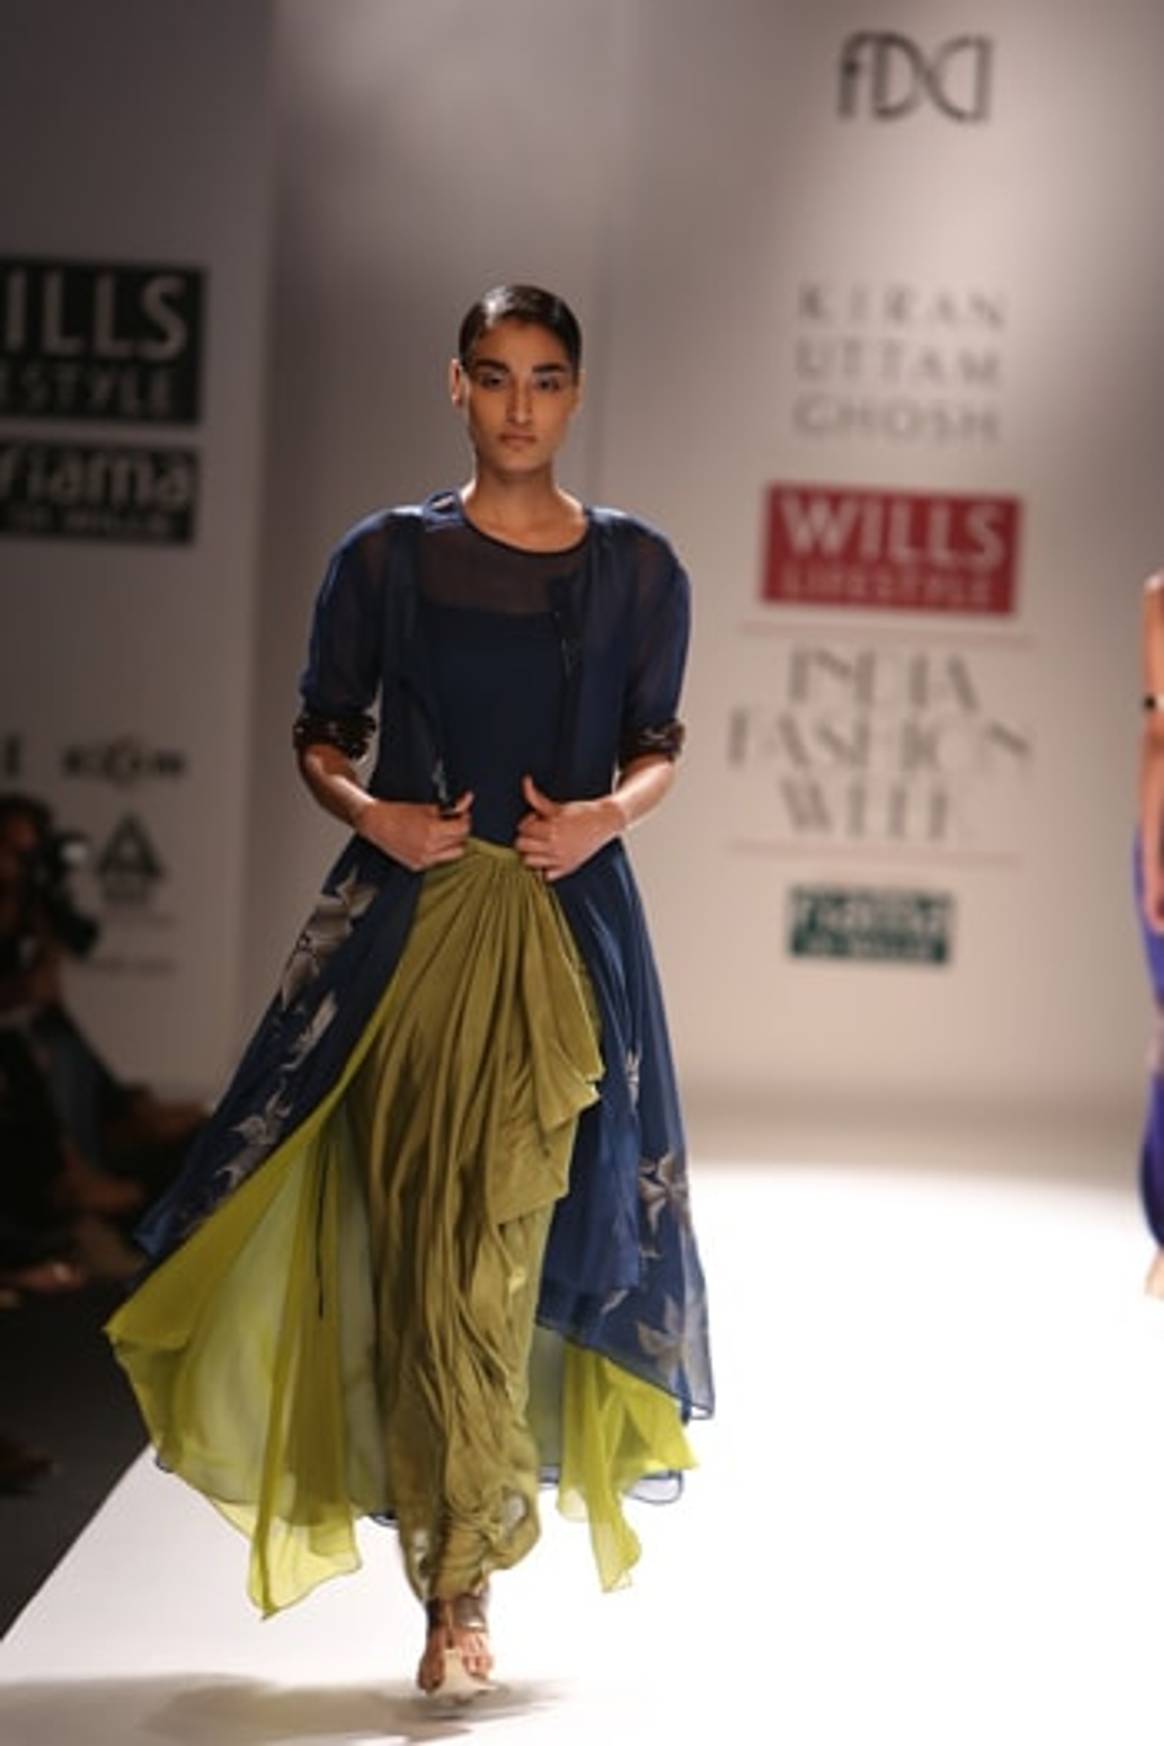 WIFW: Where business meets glamour